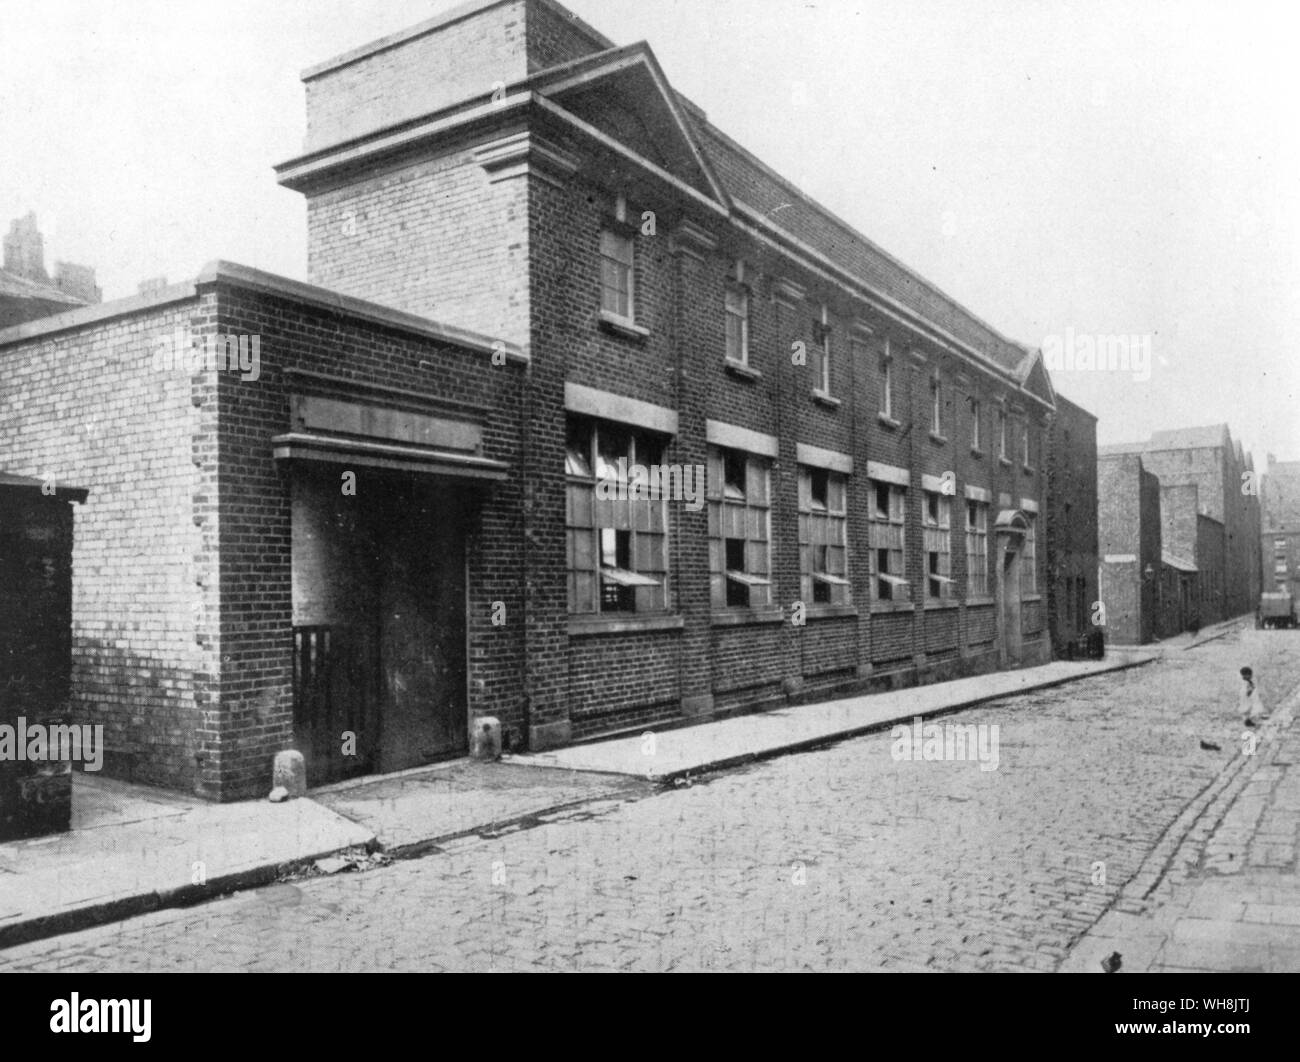 A public bath house founded in mid nineteeth century Liverpool by Kitty Wilkinson who tried to improve the living conditions of the poor Stock Photo